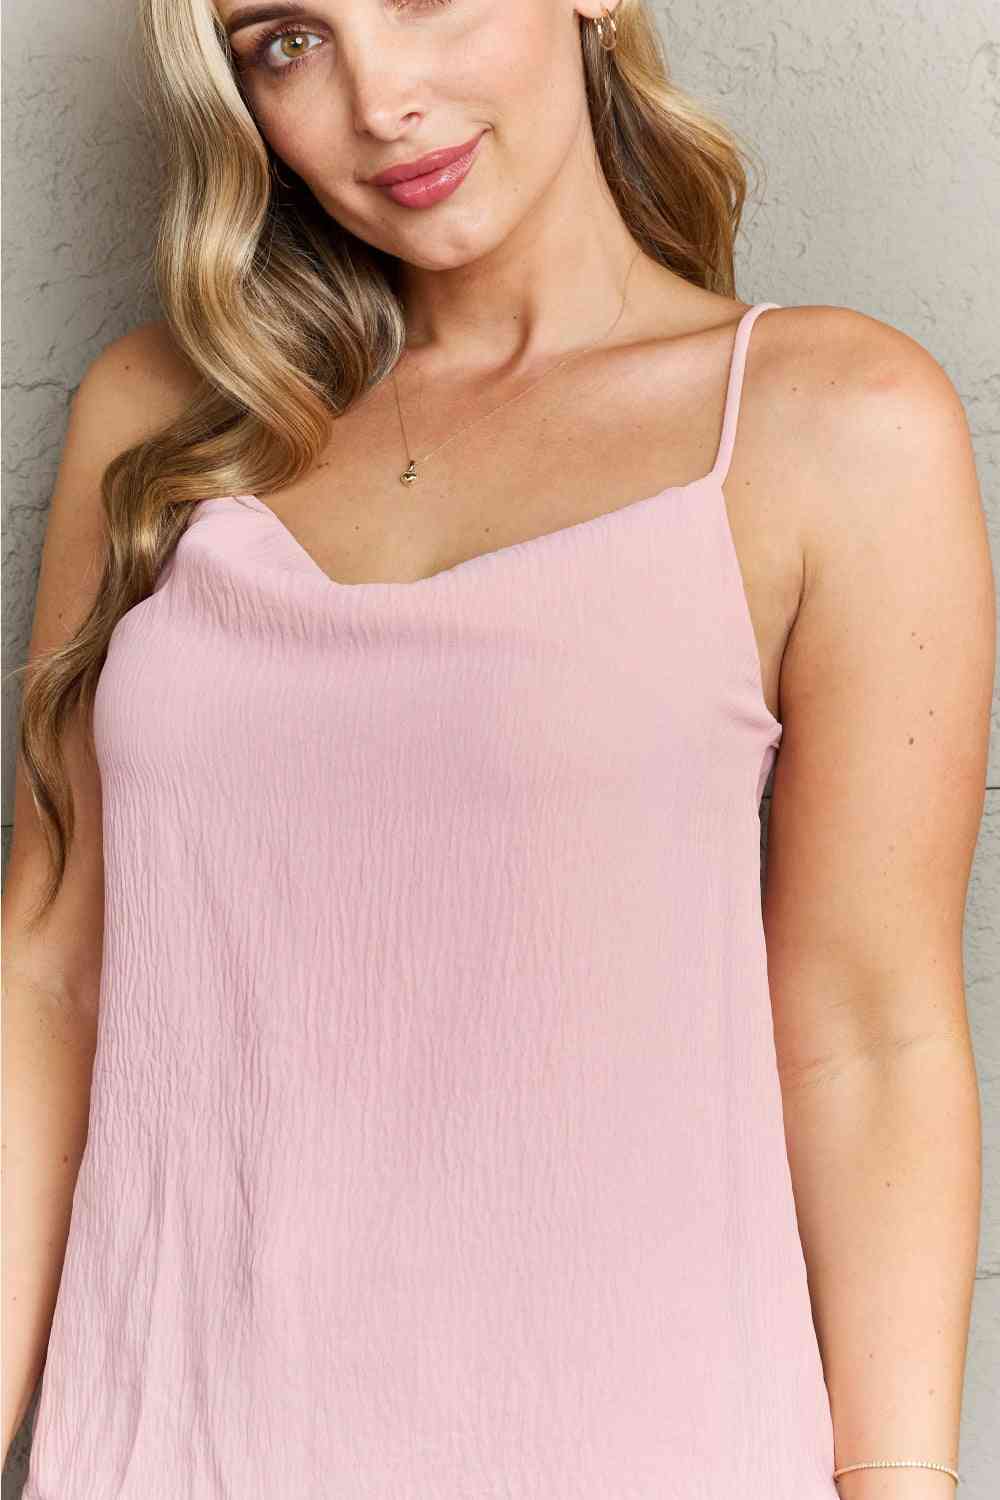 For The Weekend Loose Fit Cami - Women’s Clothing & Accessories - Shirts & Tops - 4 - 2024